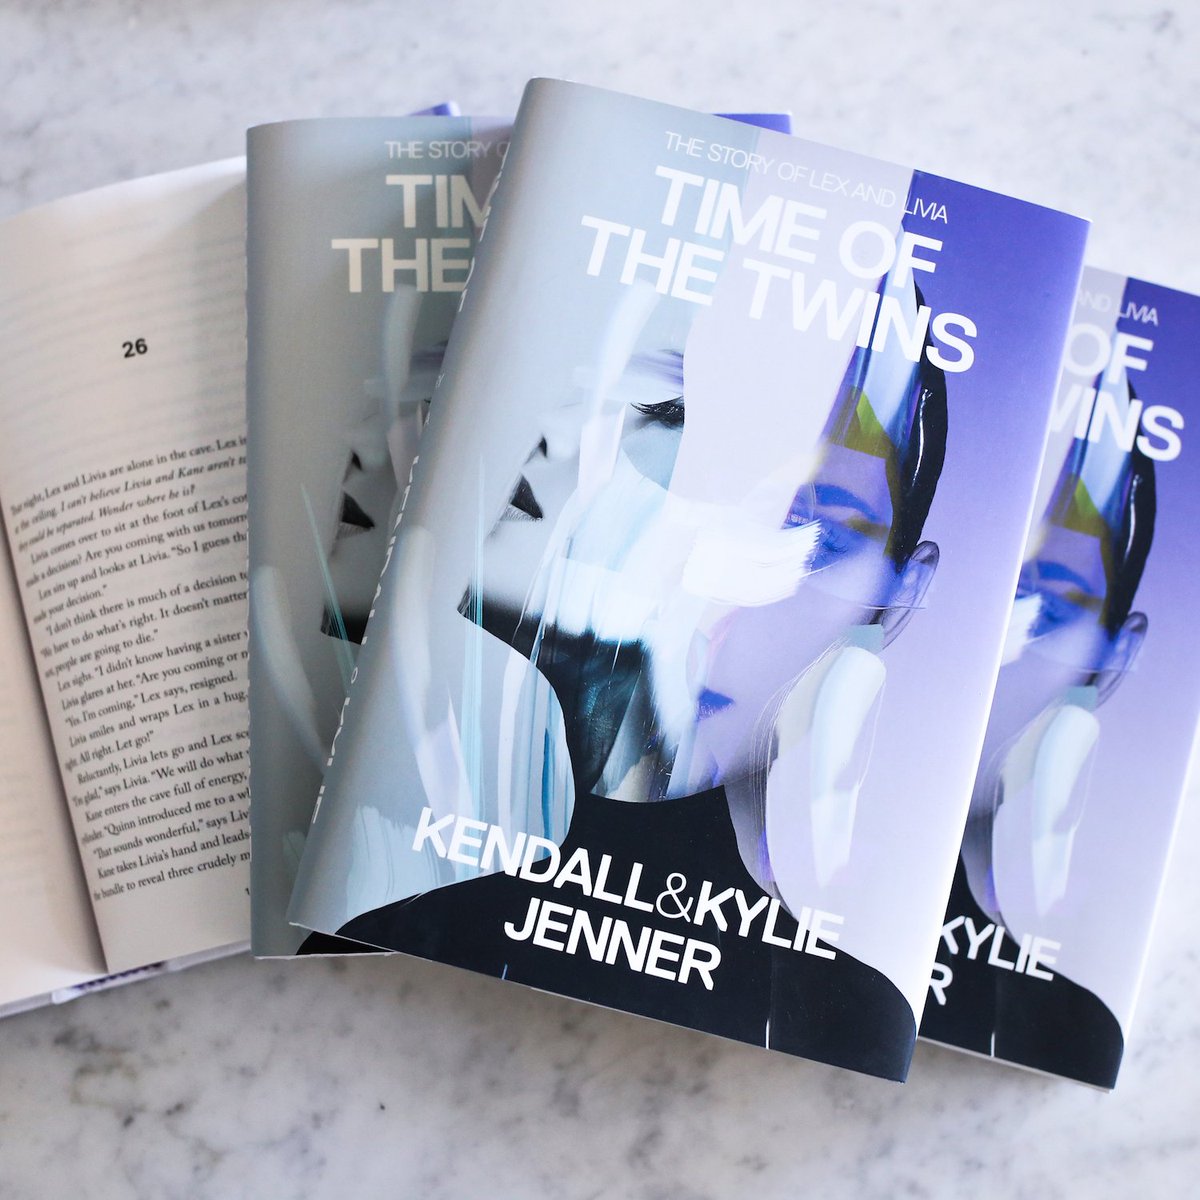 Our new book #timeofthetwins is out NOW! At Amazon, Barnes & Noble and your local bookstore! https://t.co/Z2jmIip5SZ https://t.co/d296bLfkl5